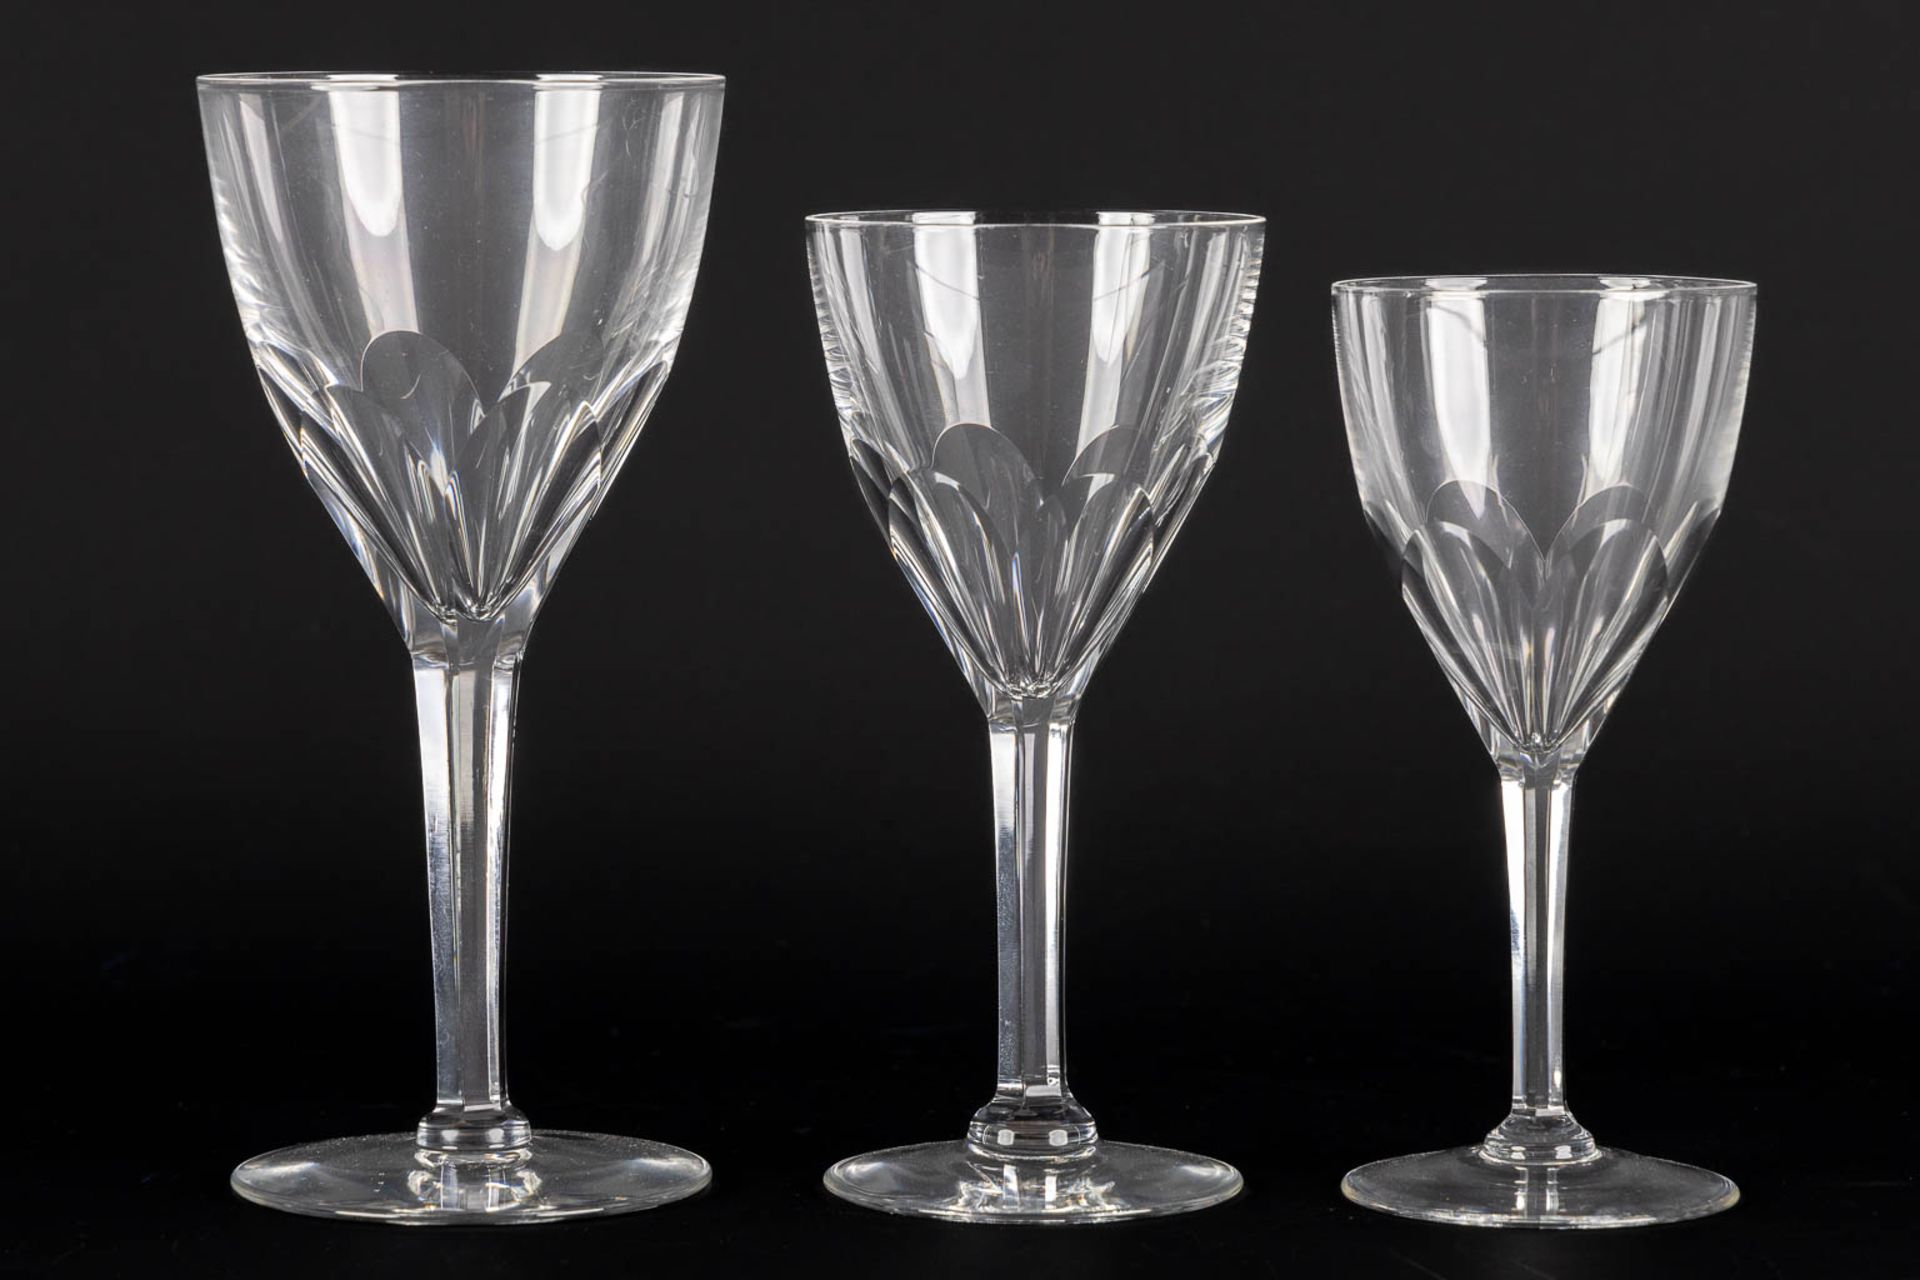 Val Saint Lambert, 'Gevaert' a large collection of coloured and cut crystal goblets. (H:19,1 cm) - Image 10 of 10